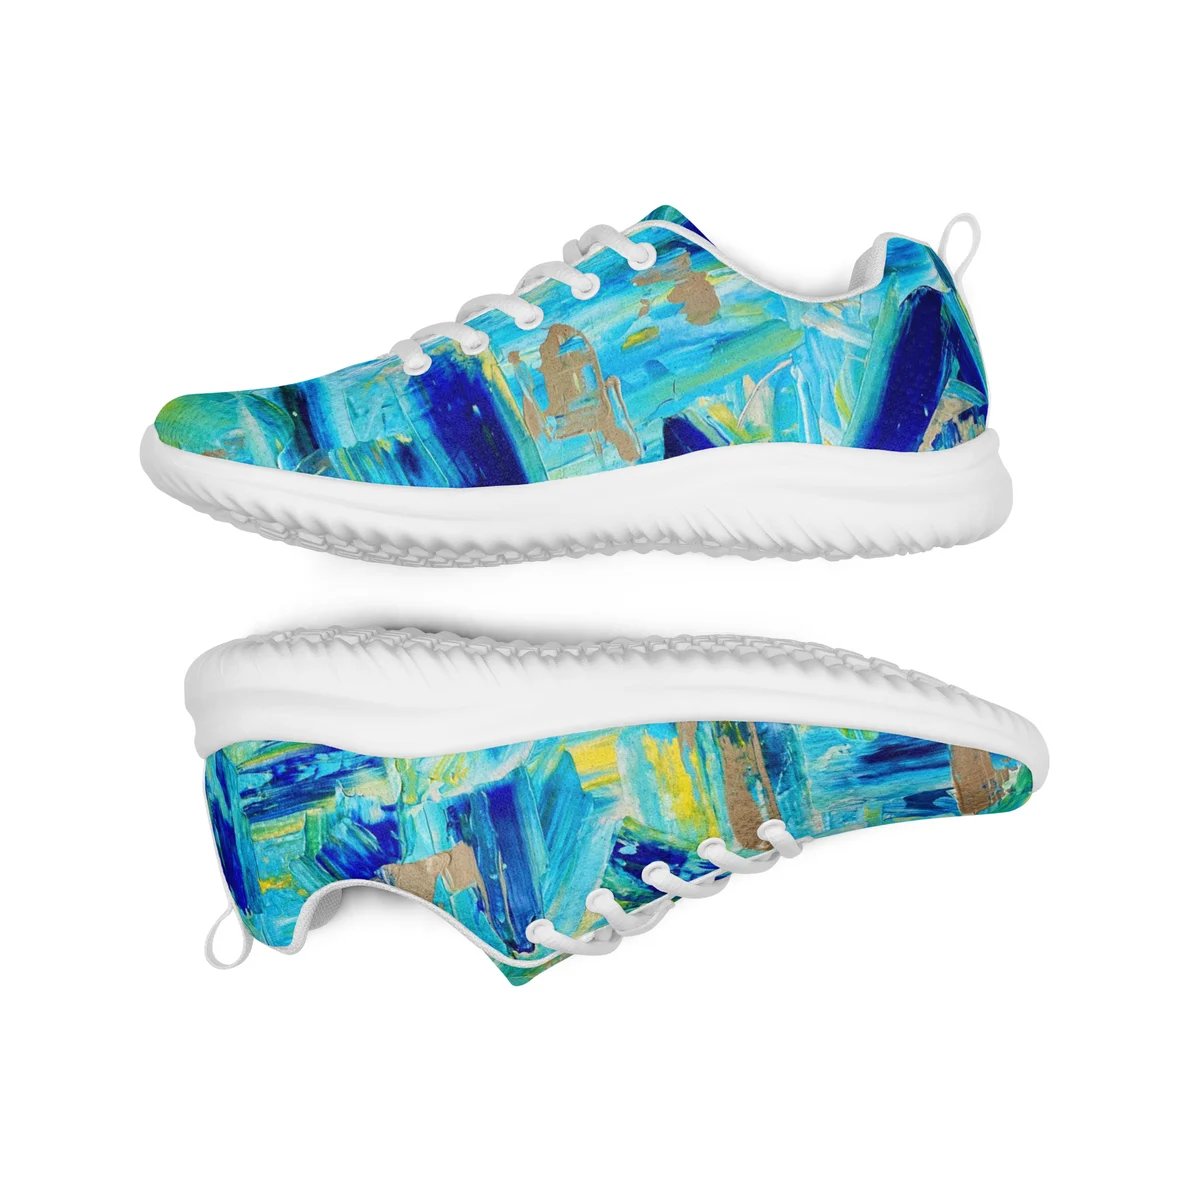 Image of "Prism" Women’s athletic shoes